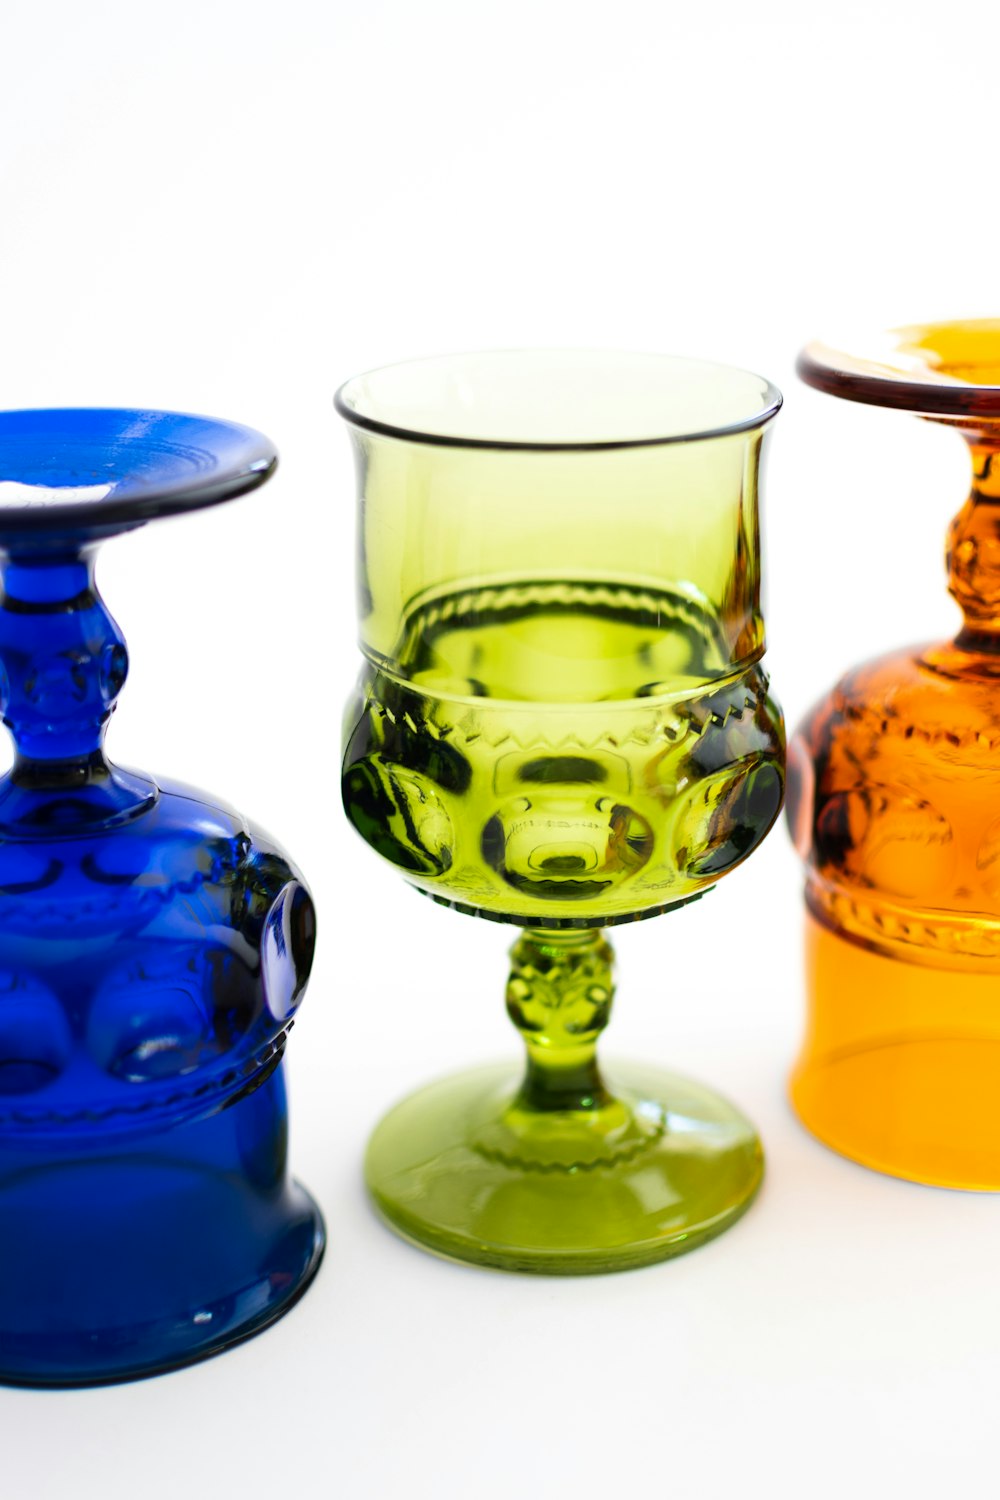 three different colored glass vases sitting next to each other